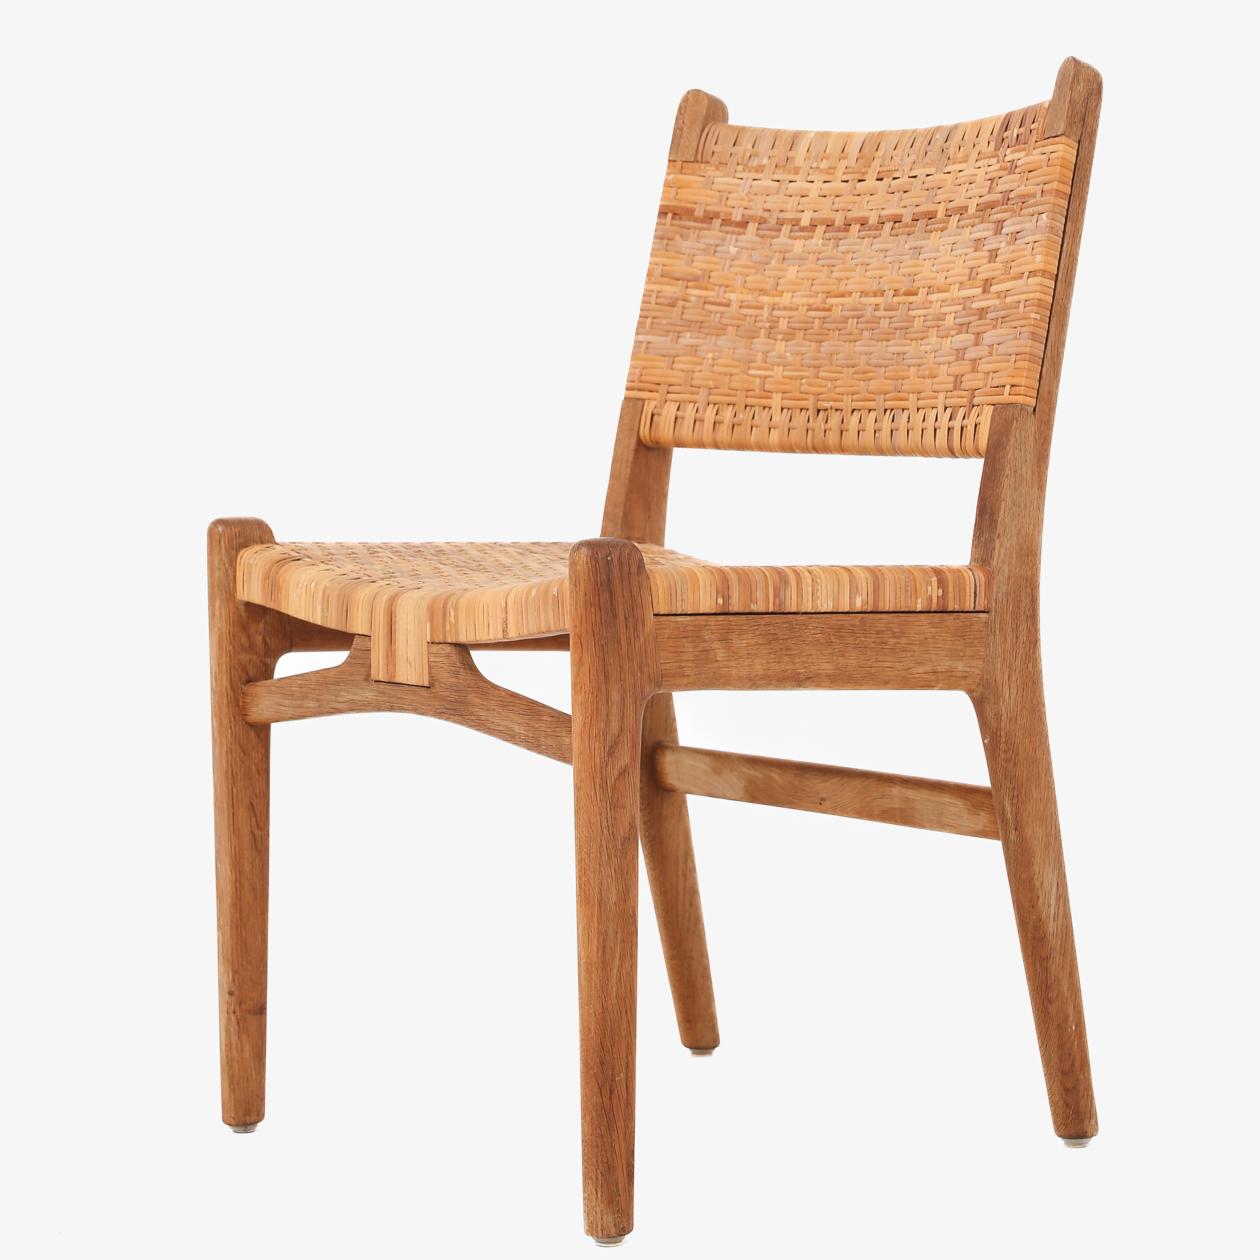 CH 31 - dining chairs in patinated oak and cane. 4 Pcs. Hans J. Wegner / Carl Hansen.